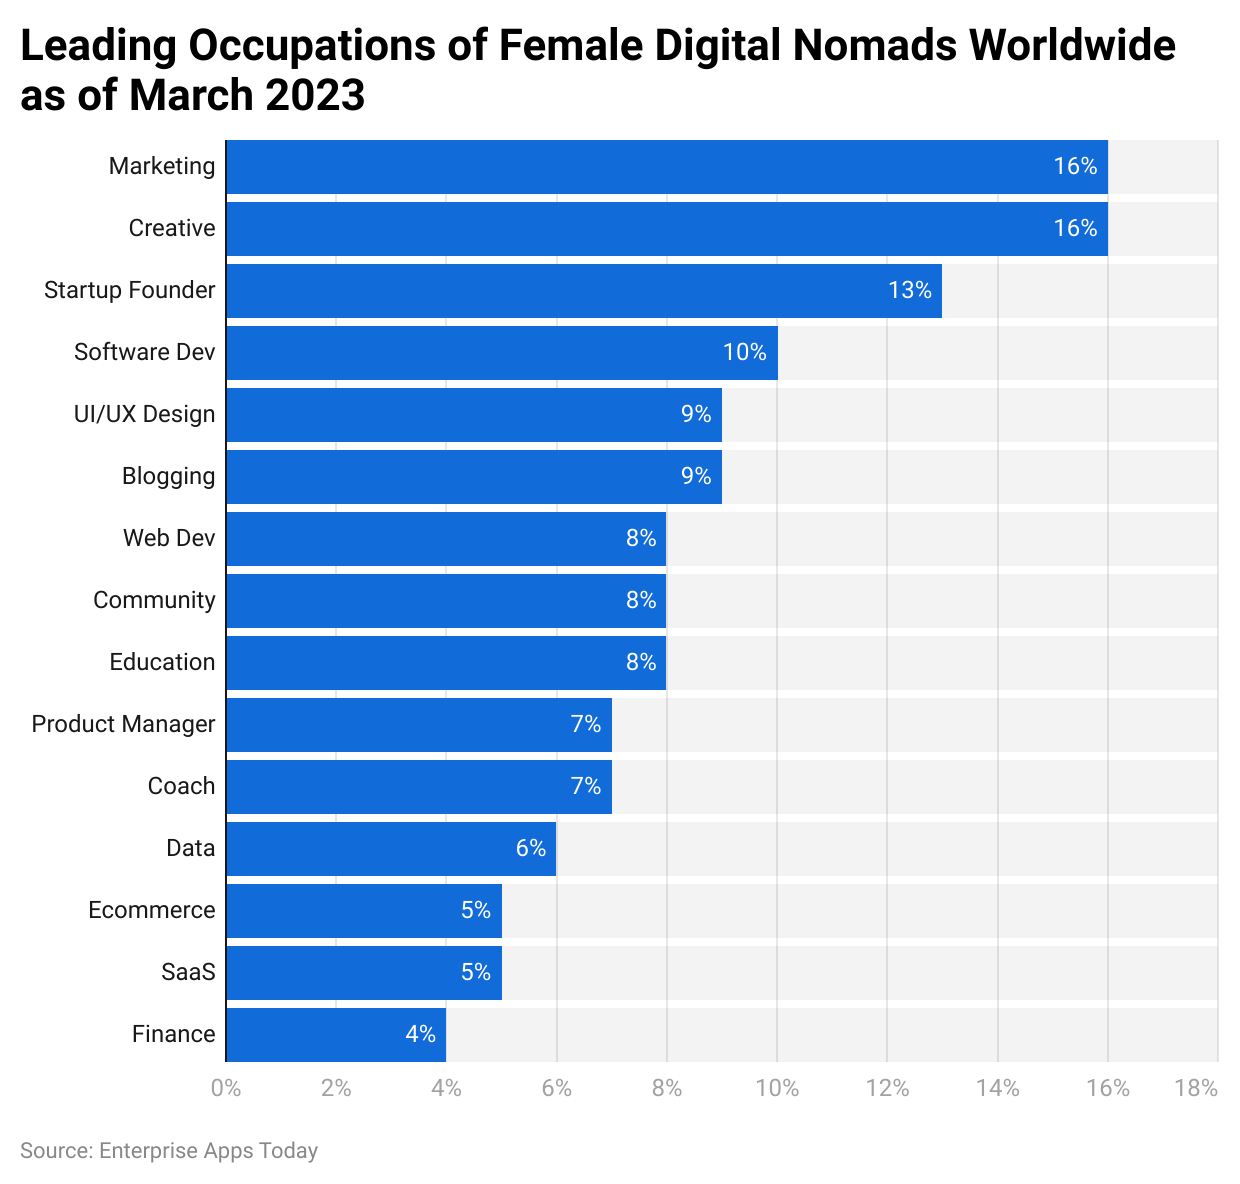 Leading occupations of female digital nomads worldwide as of March 2023